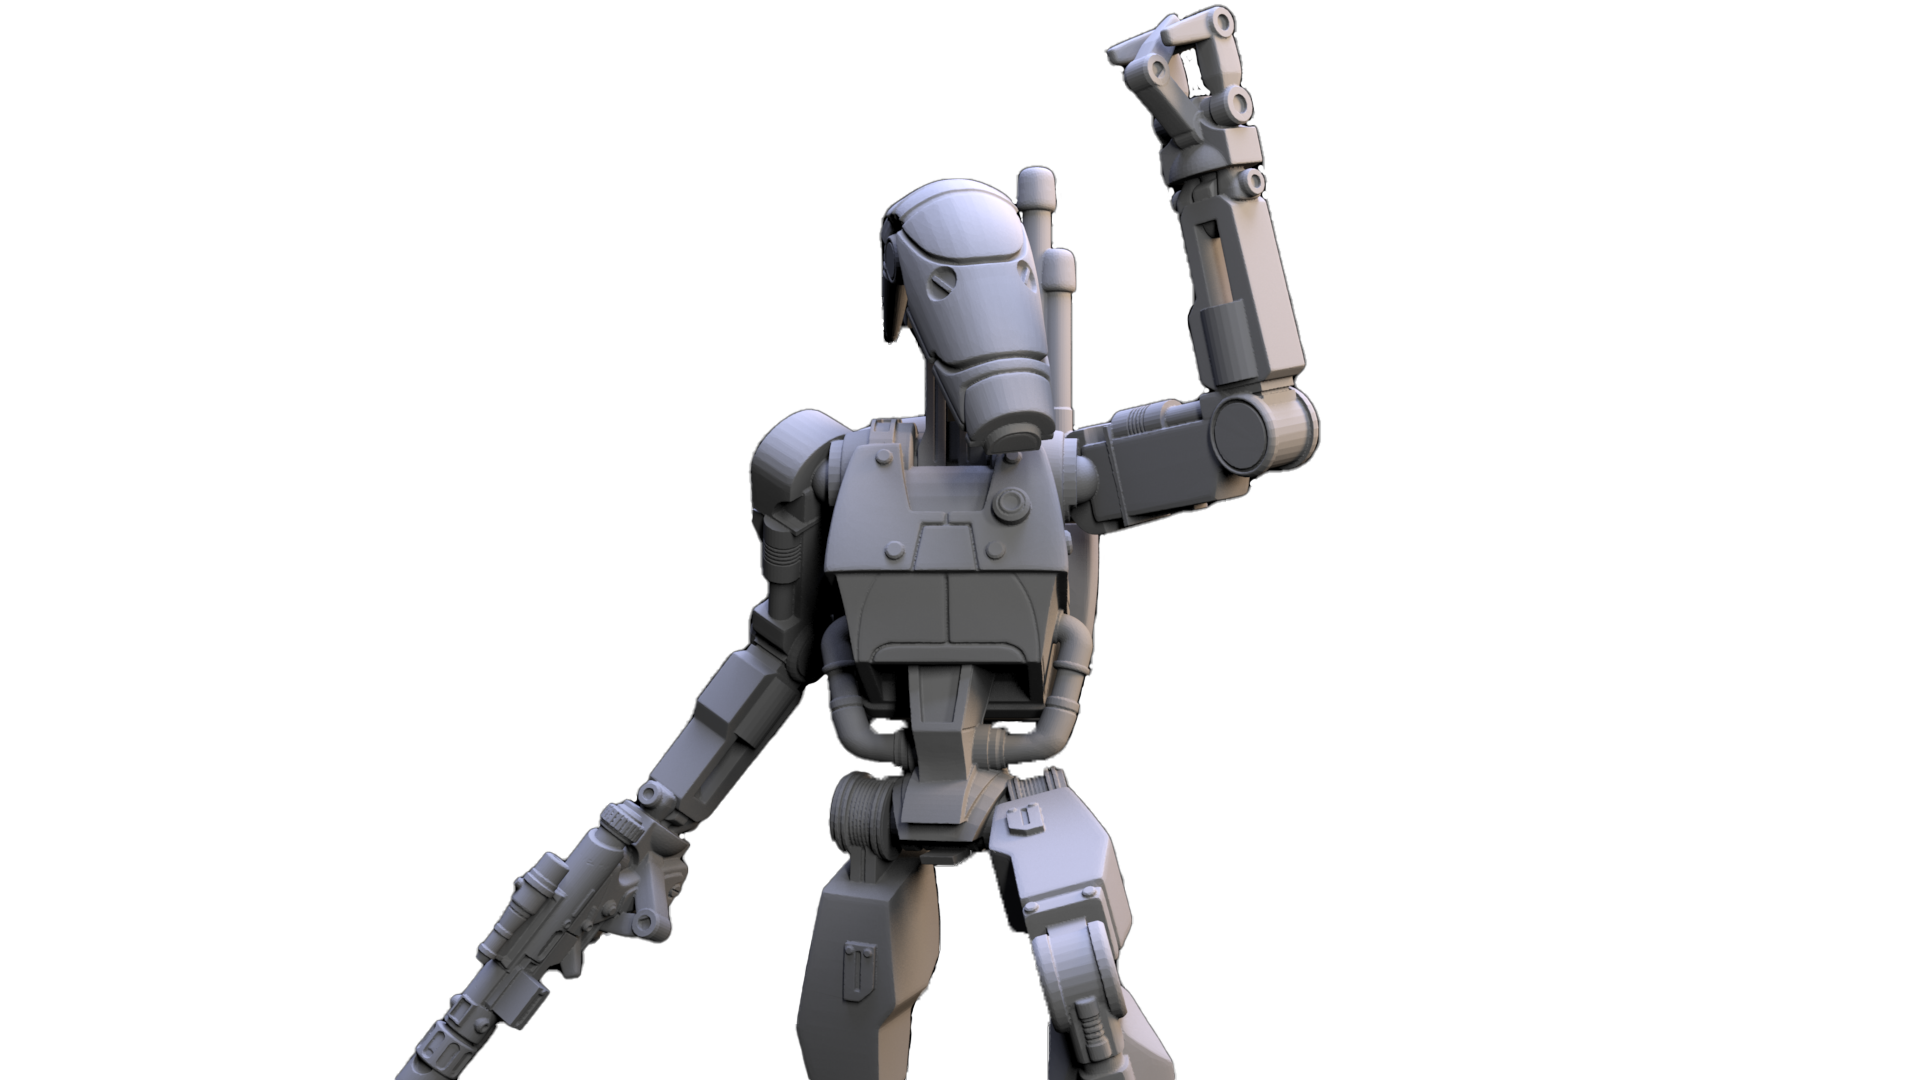 1:48 Scale Battle Droid Army - Officer Class - 3D Print Files